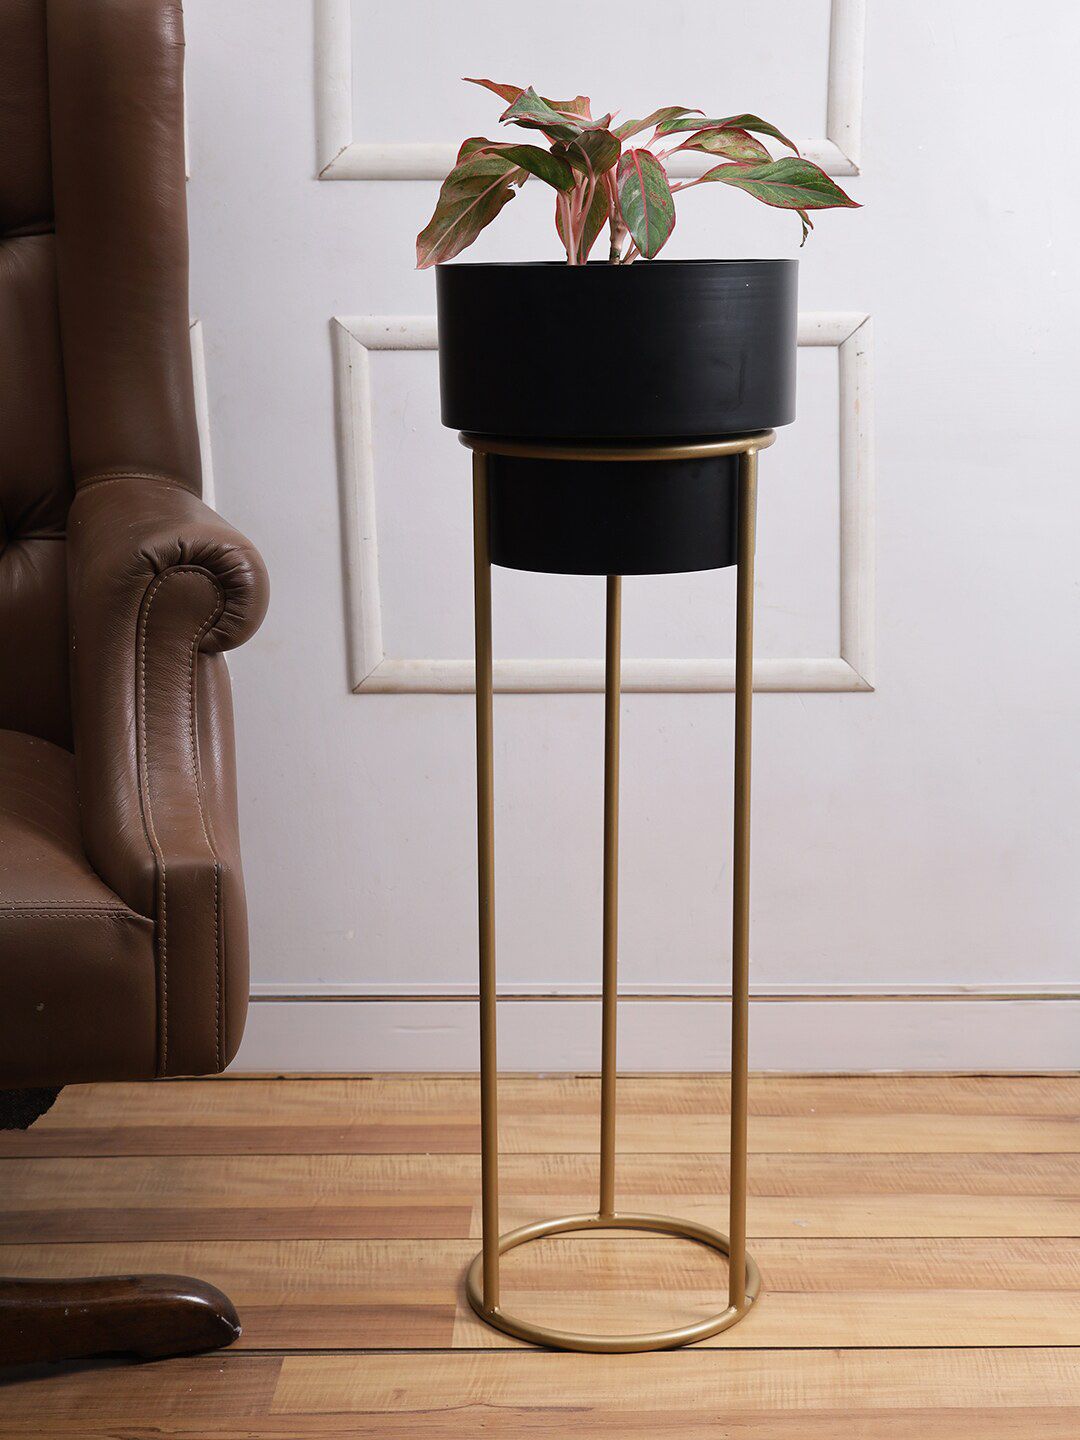 Aapno Rajasthan Black Solid Metal Planter With Stand Price in India